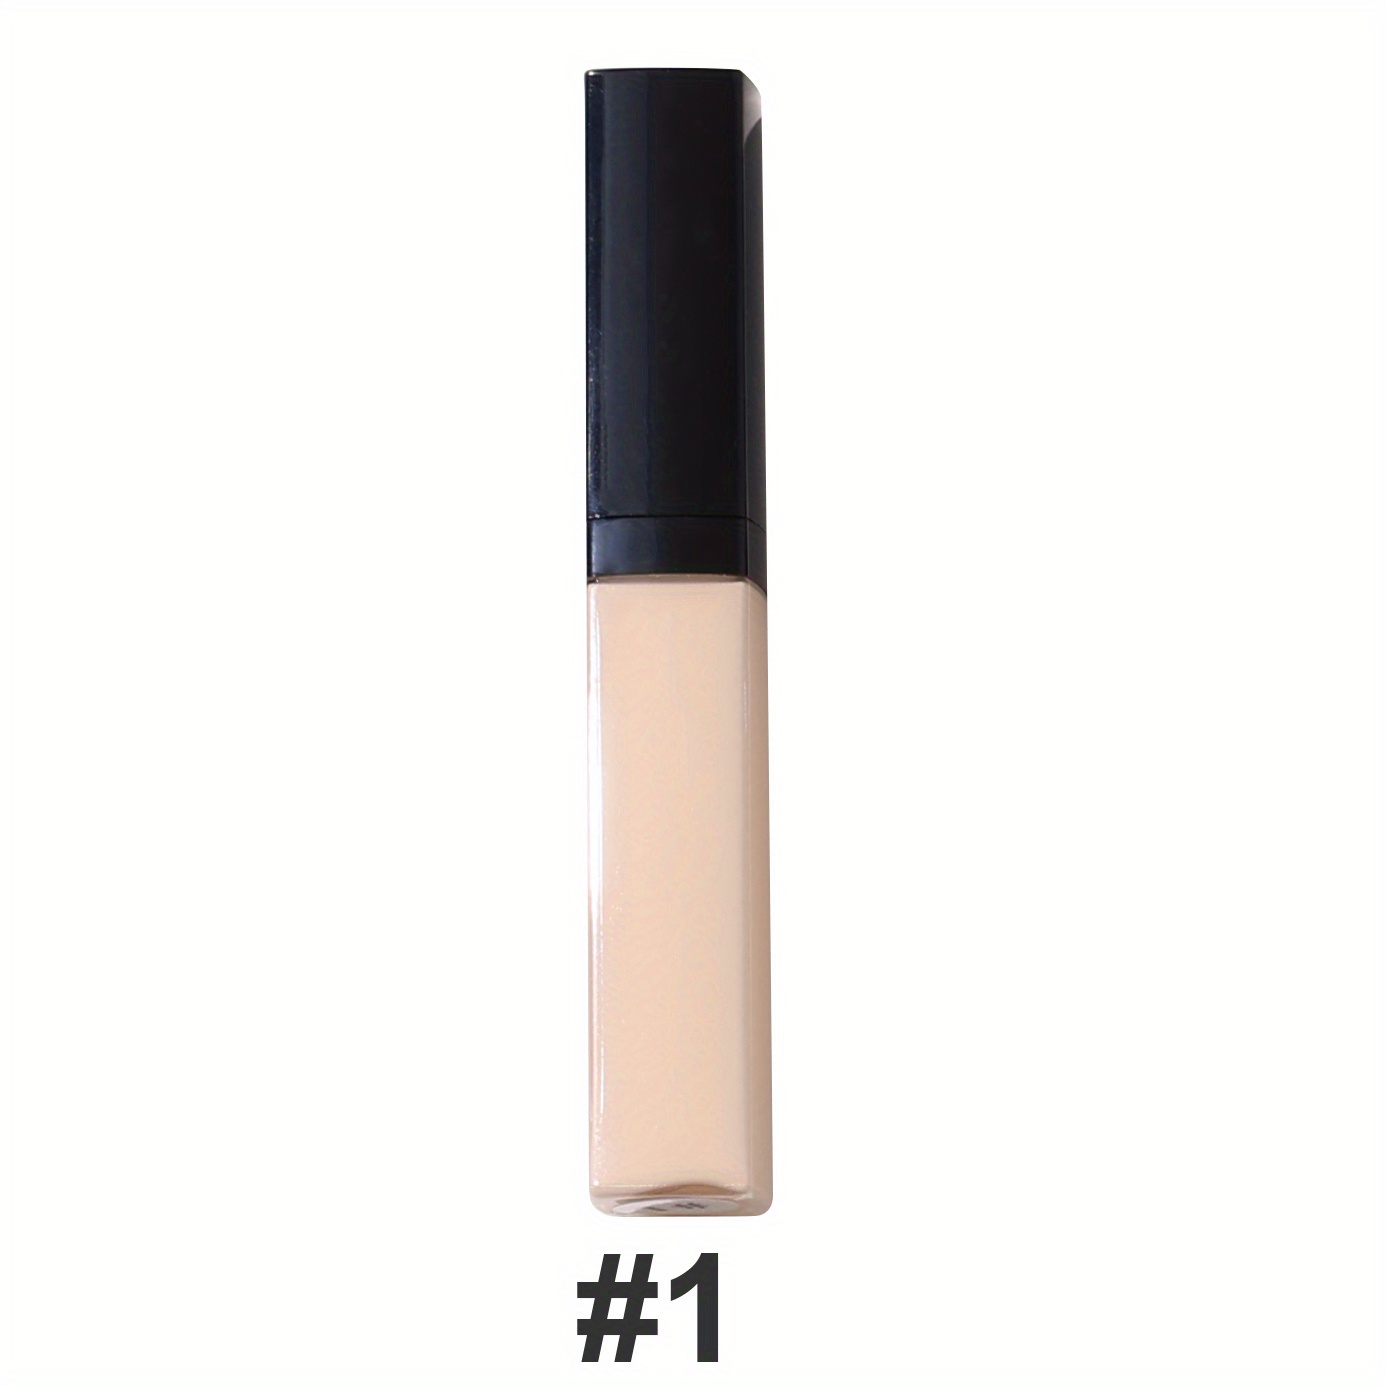 18 Colors Highly Pigmented Concealer - Full Coverage, Light Beige